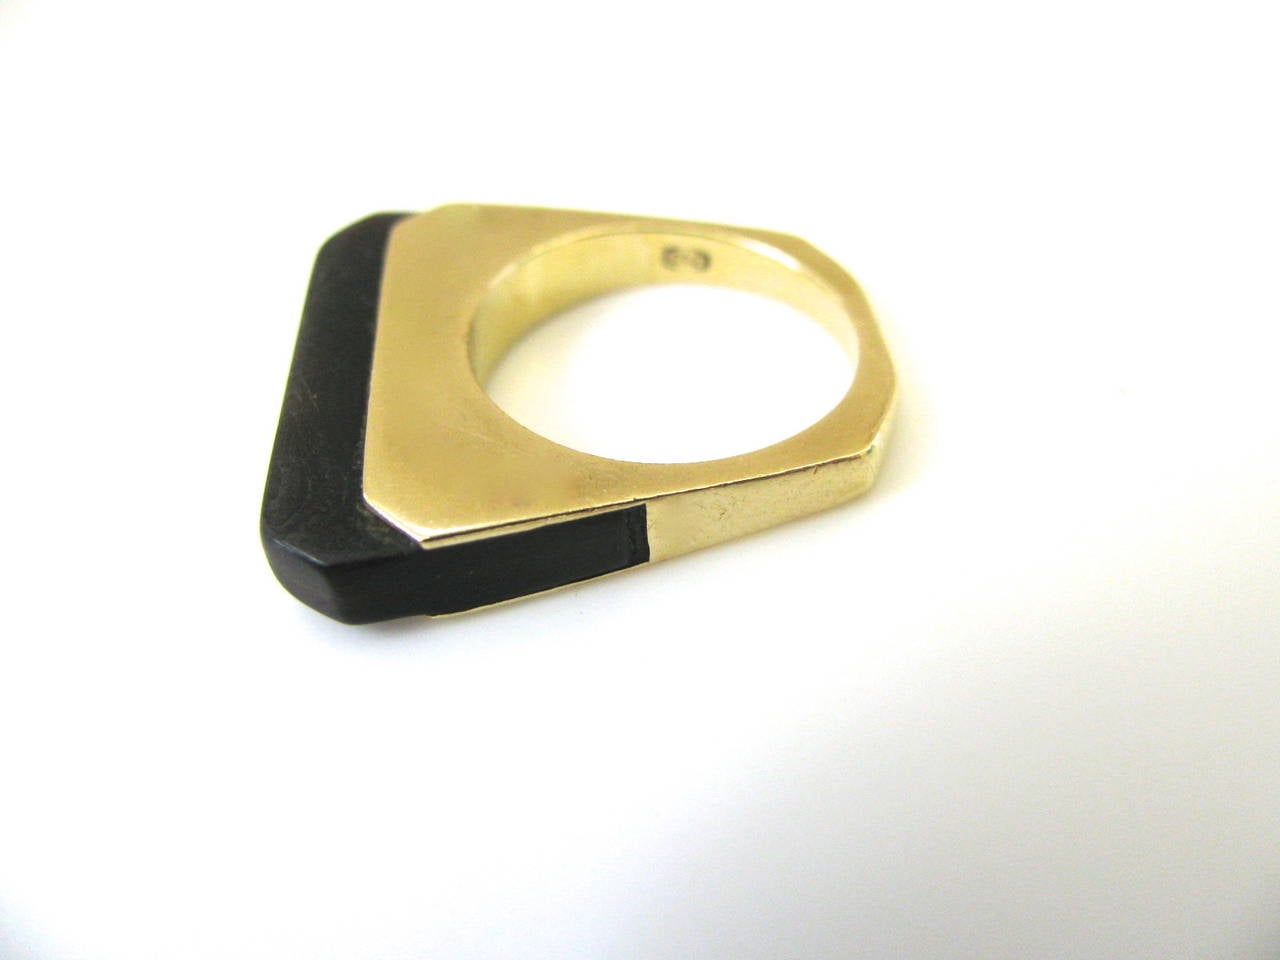 A Stylish Wood and Gold Ring. The 18k Yellow gold trapezoidal band inset with carved wood. The Minimalist design so 70's. A Nice everyday ring. Great for stacking. Chic and comfortable. European. Size 5 3/4.